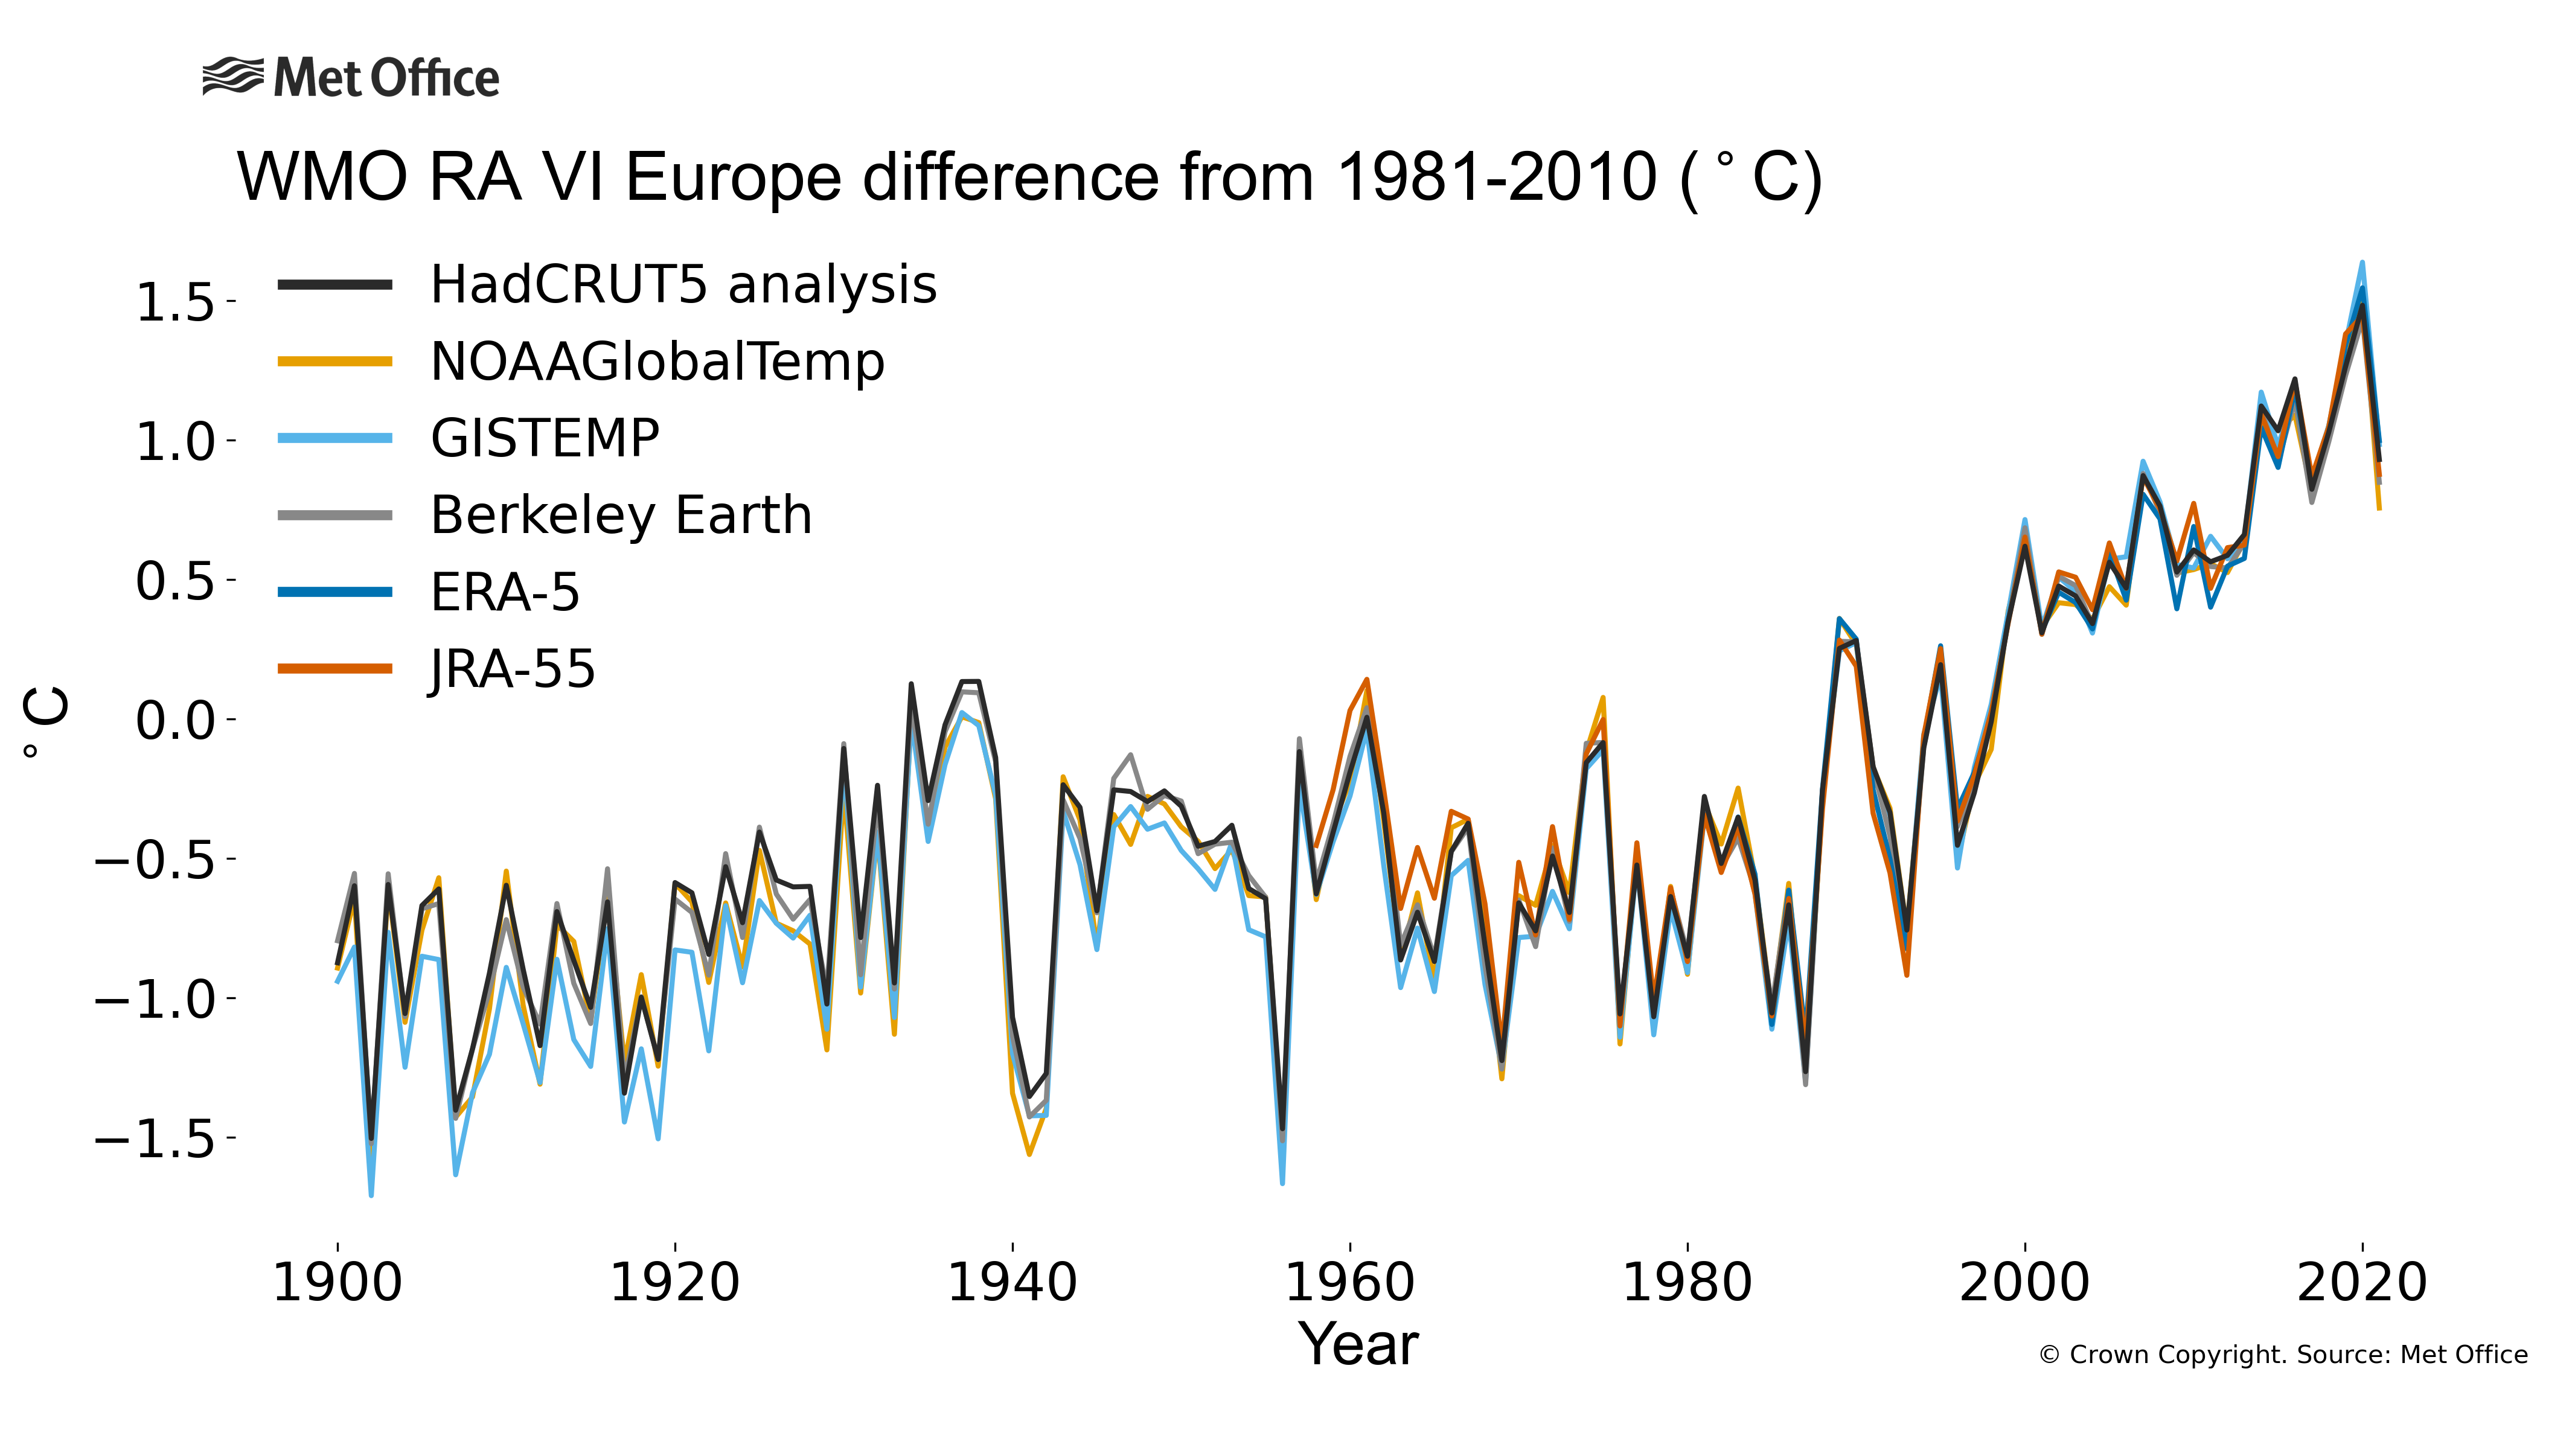 
The plot shows annual average temperature anomalies (relative to 1981-2010) for WMO RA VI - Europe. Data are from six different data sets: HadCRUT5, NOAAGlobalTemp, GISTEMP, Berkeley Earth, ERA5 and JRA55.
